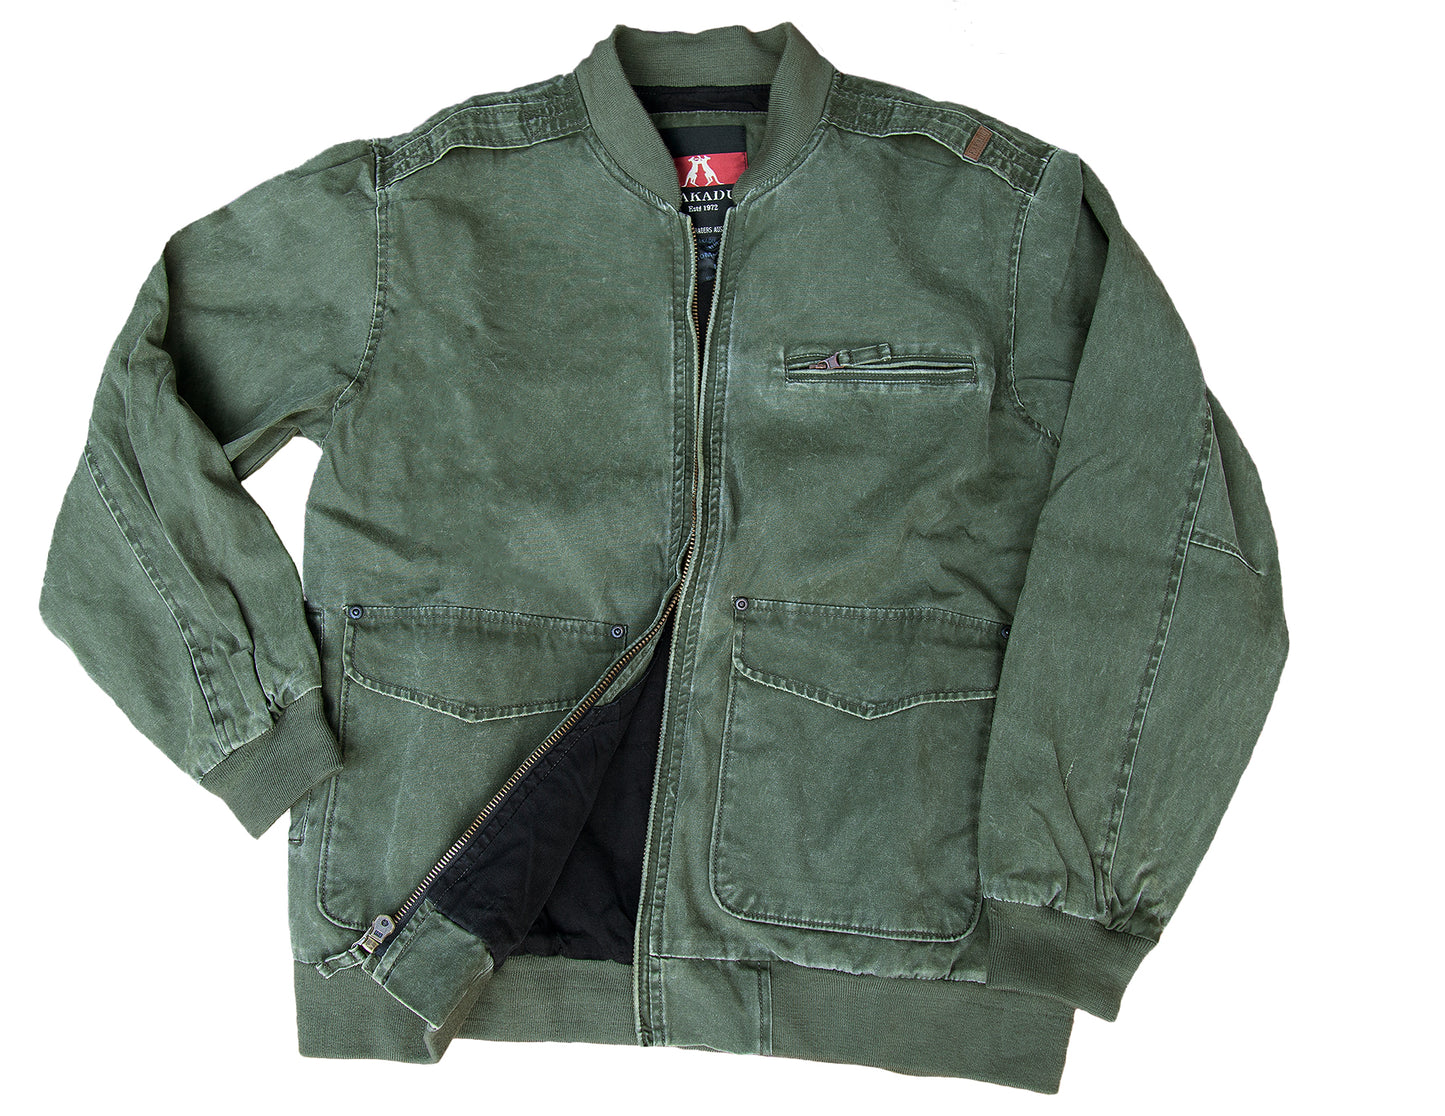 Leisure jacket Blouson jacket with knitting collar and zipper in Tobacco and Loden Green and Tobacco up to 3XL